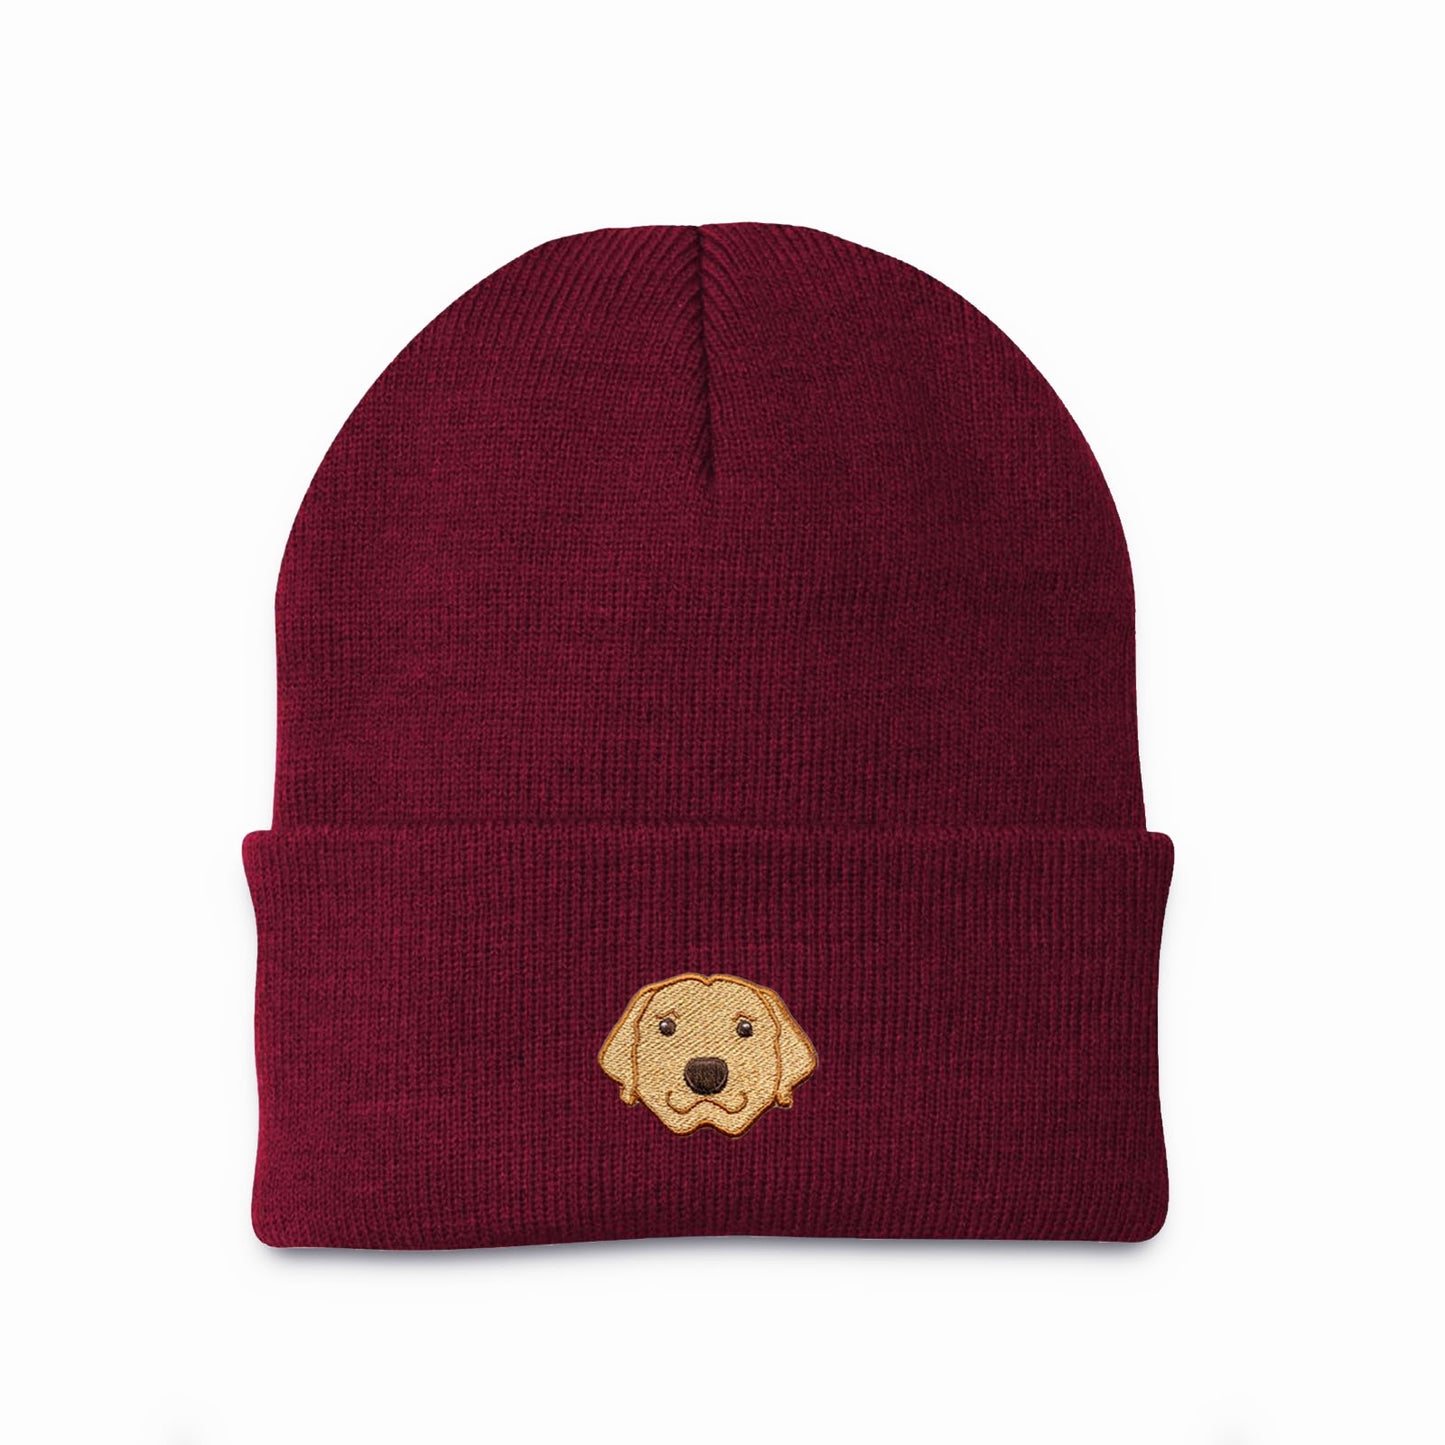 Maroon Custom Dog beanie personalized and embroidered on the front.